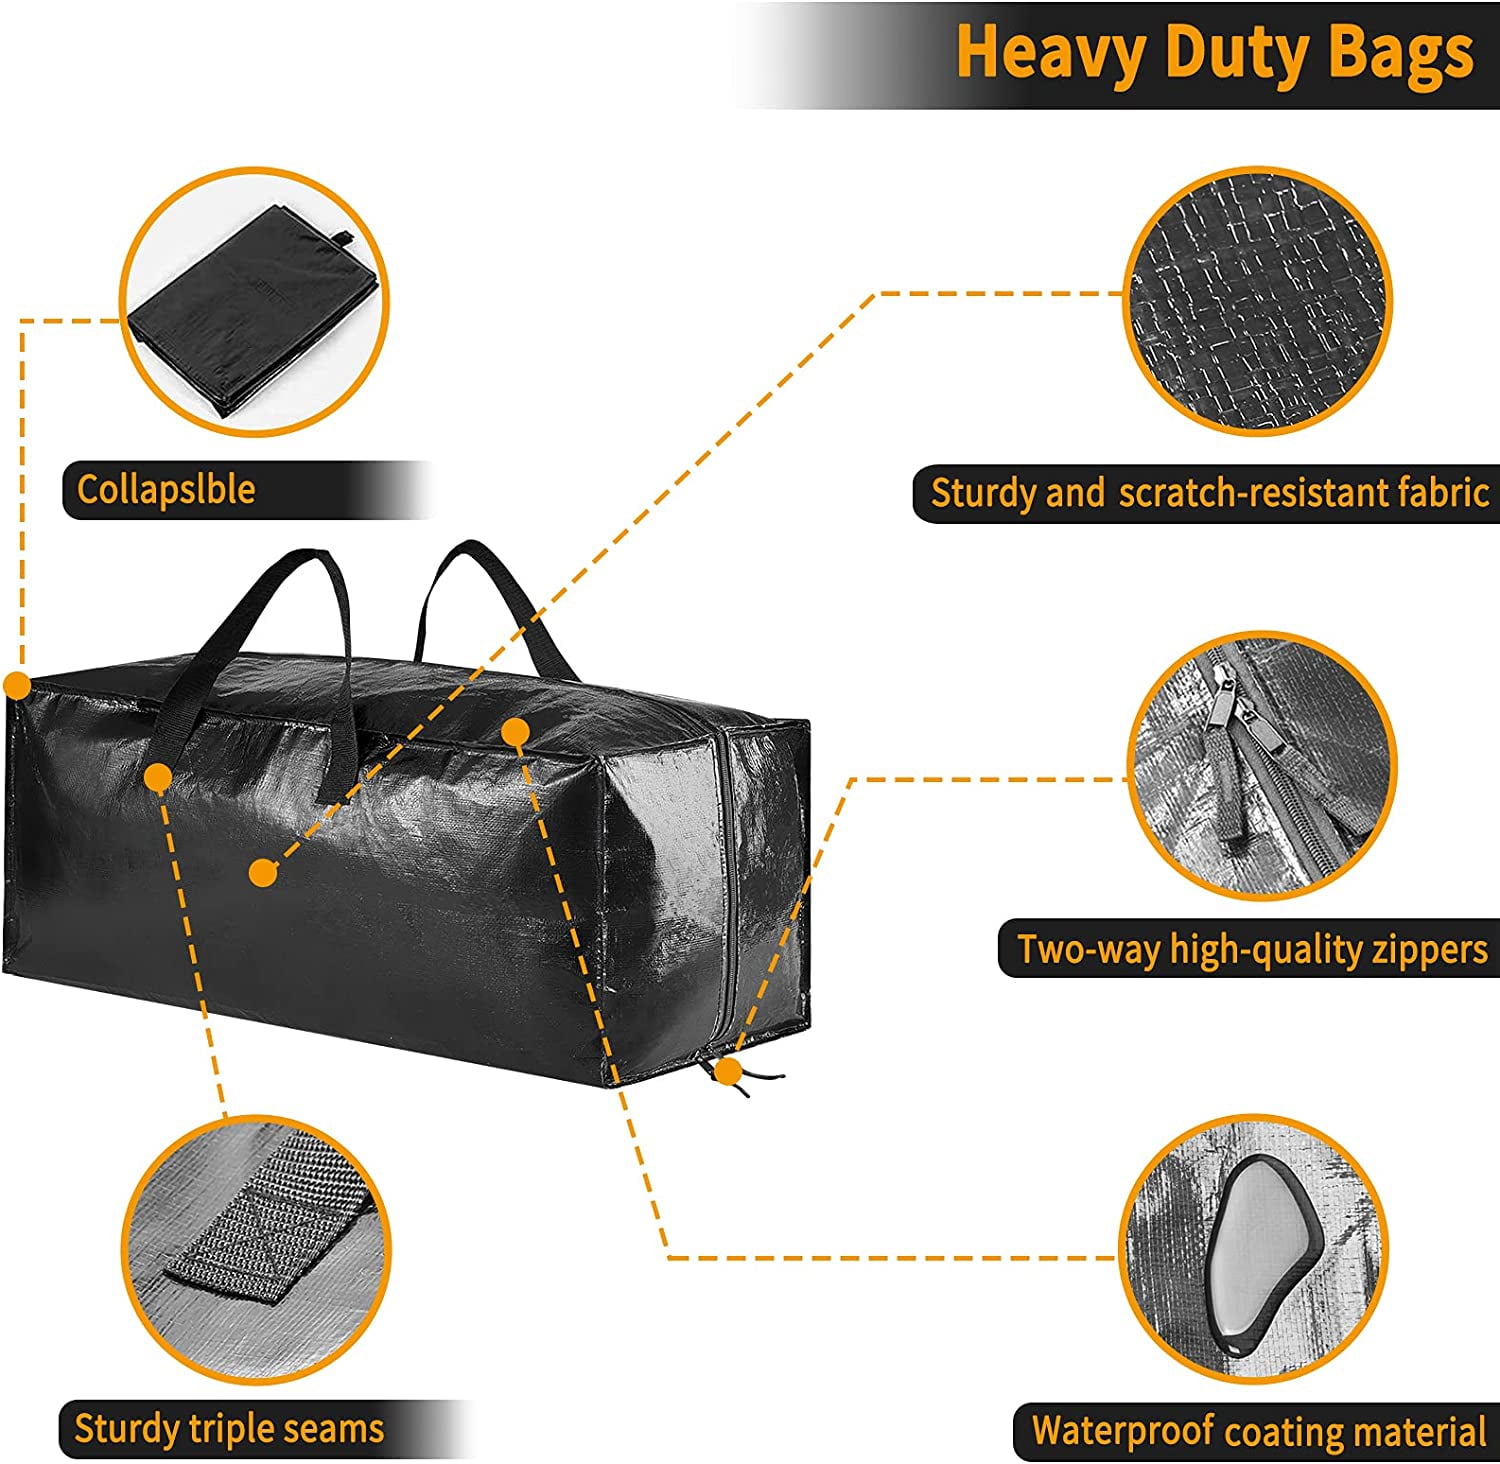 Husfou 20pcs Travel Storage Bags, Waterproof Trip Bags, Zipper Clear  Storage Plastic Bags Multifunction Luggage Organizer Bag Pouch Space Saver